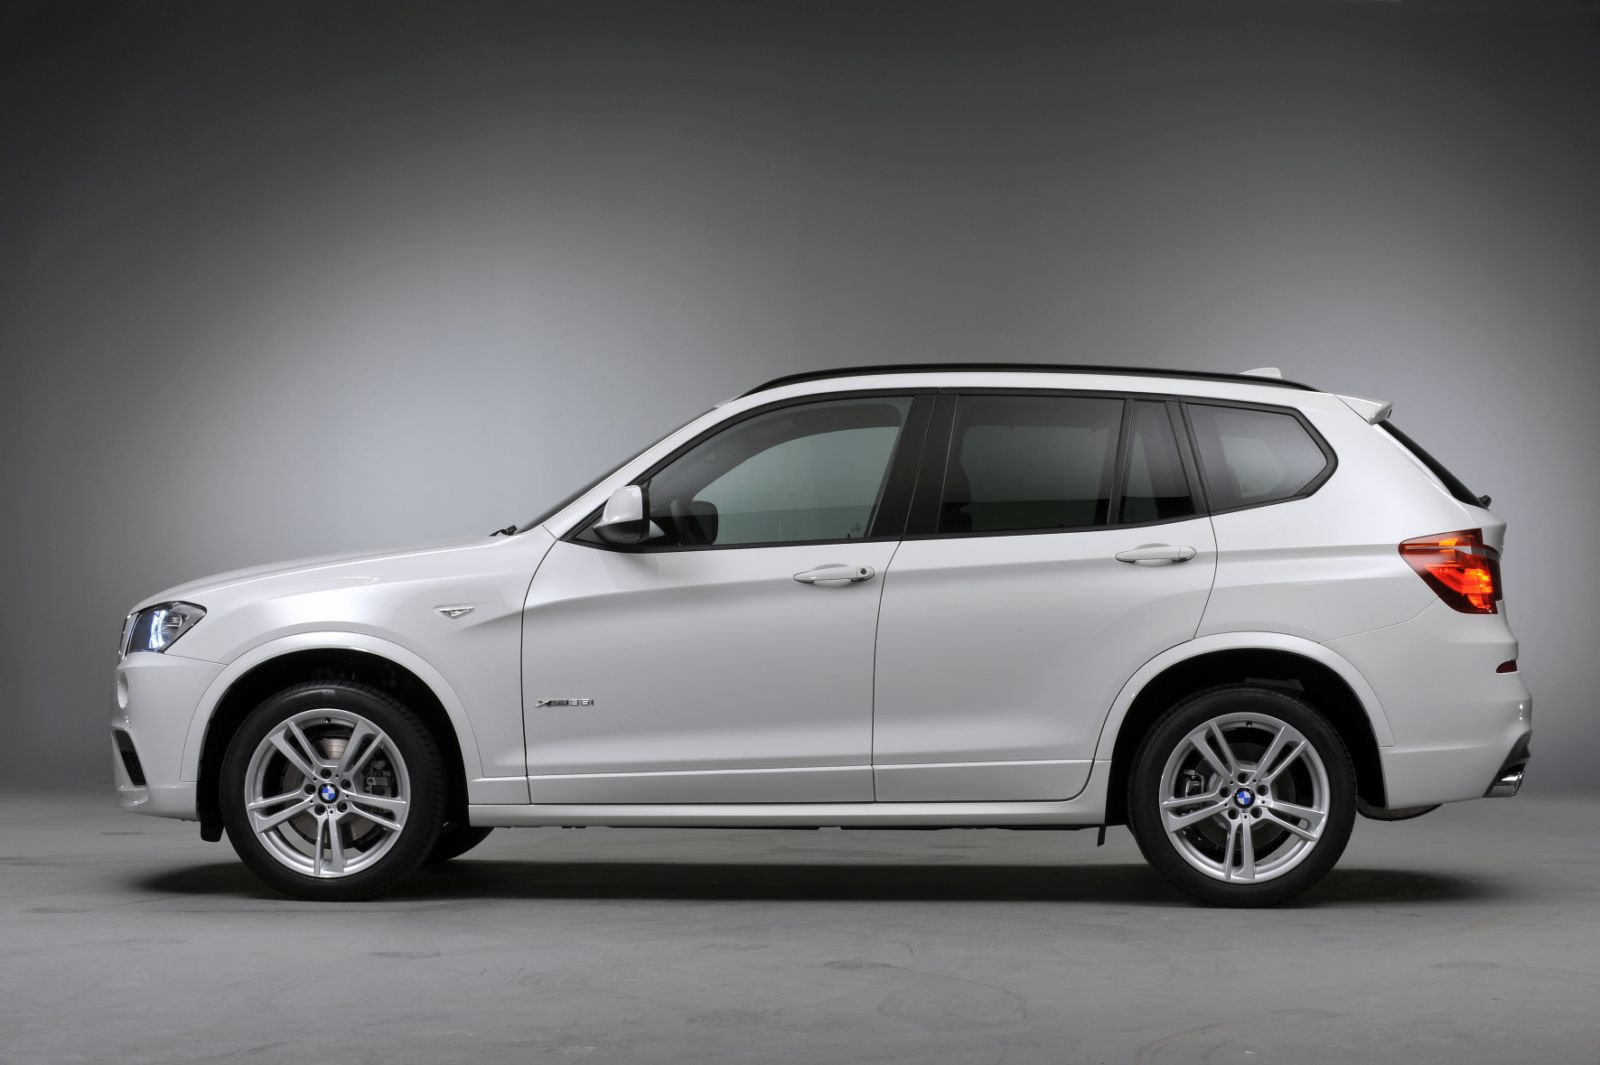 Paris Preview: 2011 BMW X3 with M Sport package